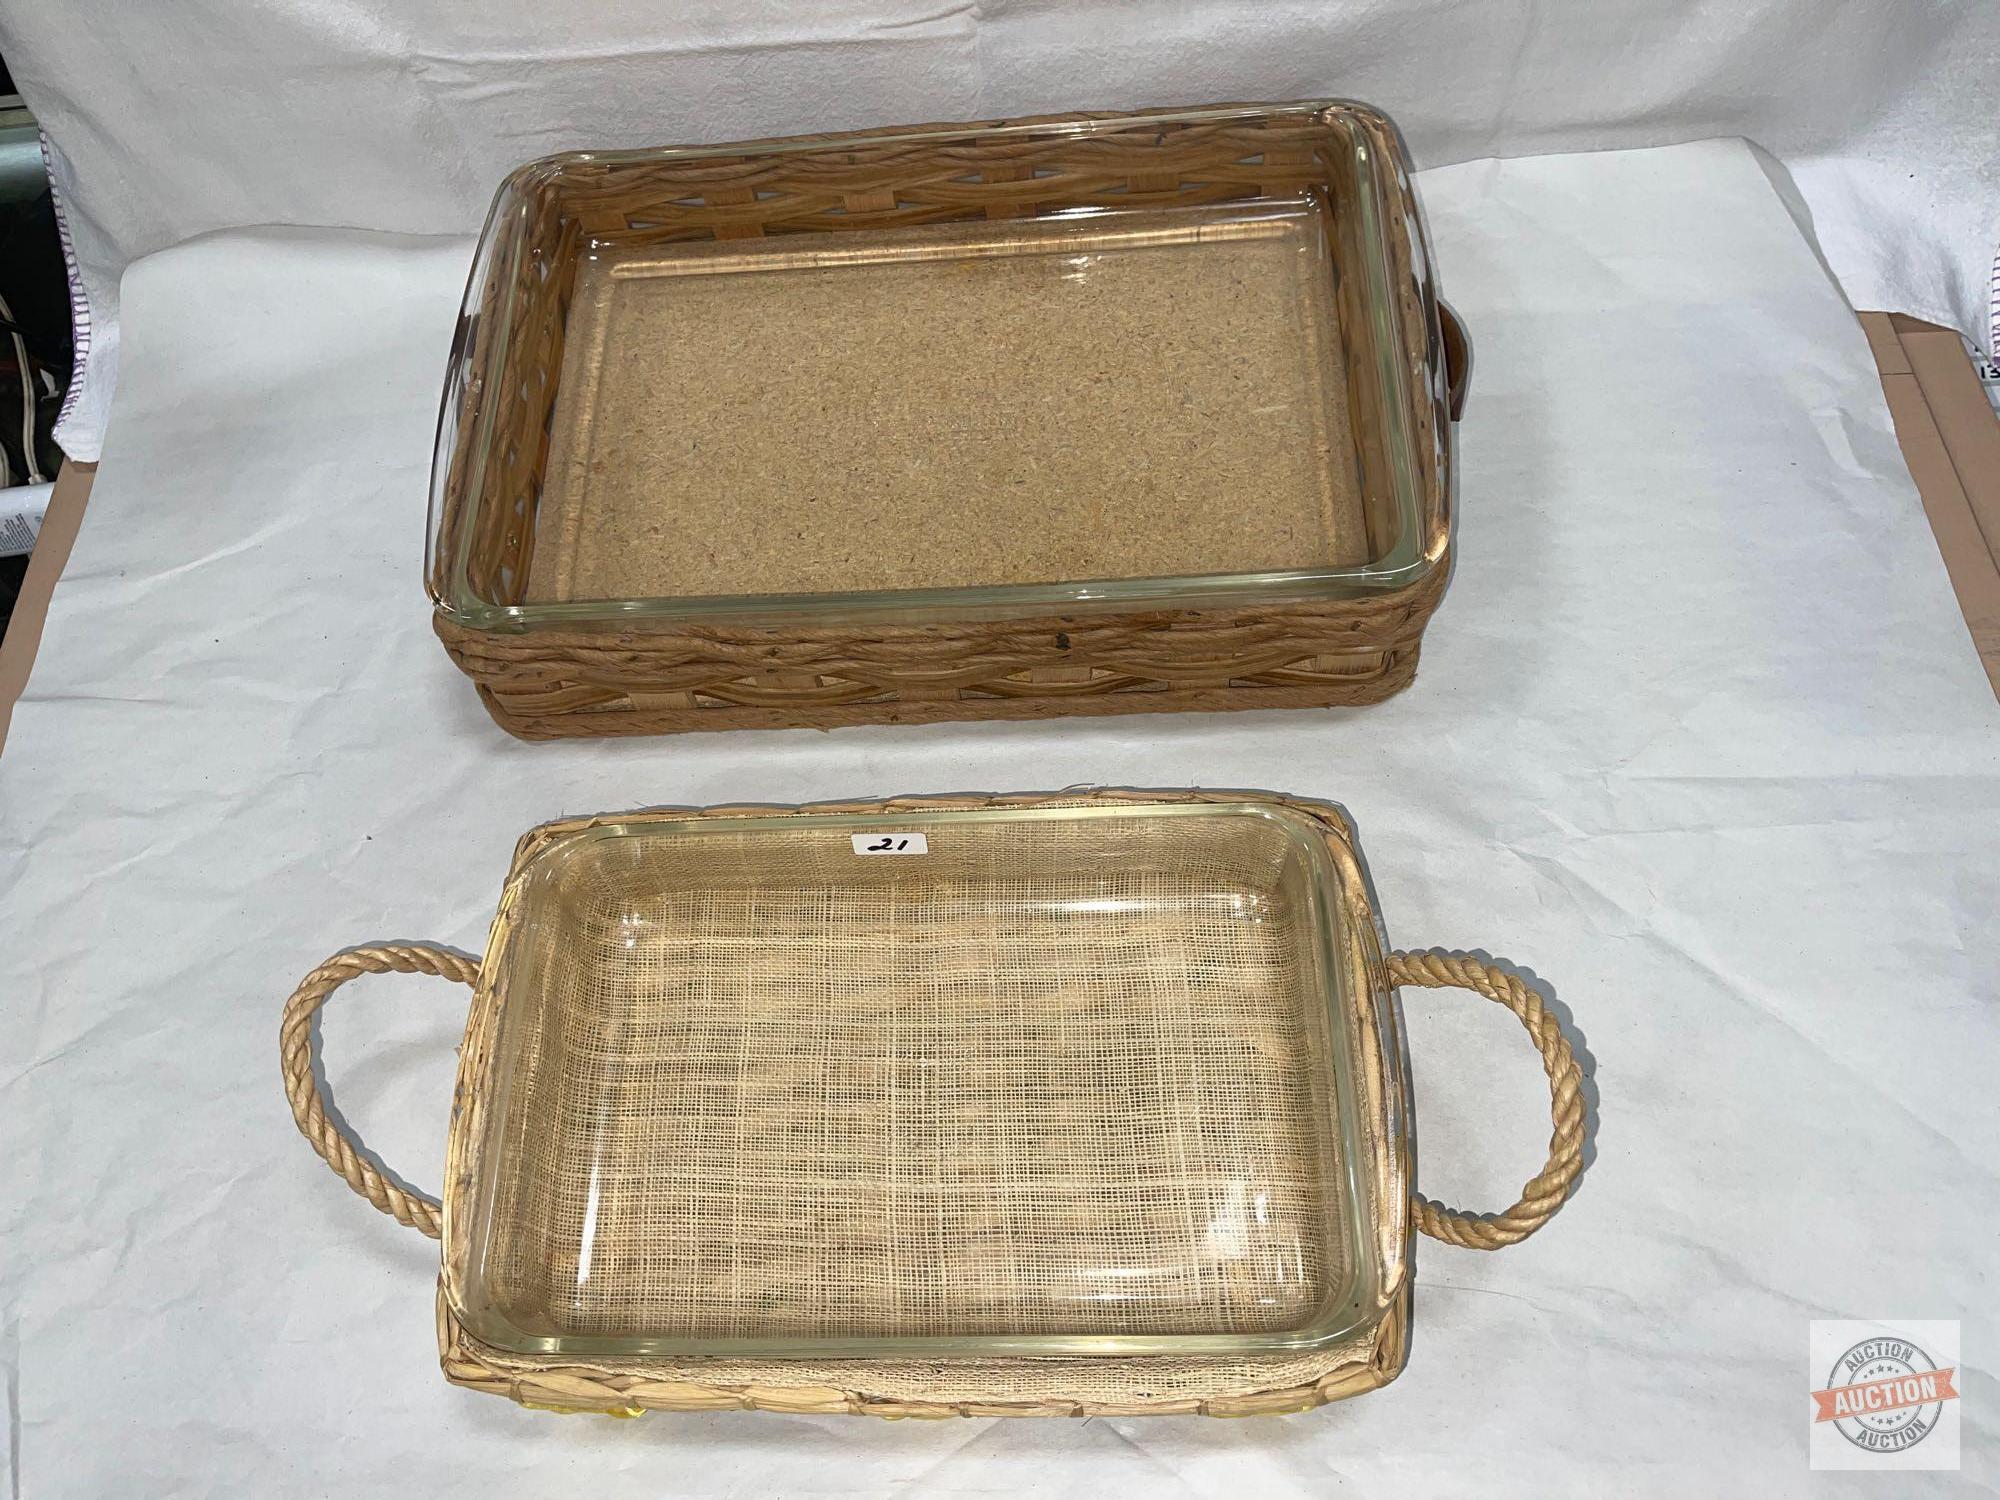 Bakeware - 2 Pyrex rectangular baking dishes w/cozys, 6x10 and 9x13